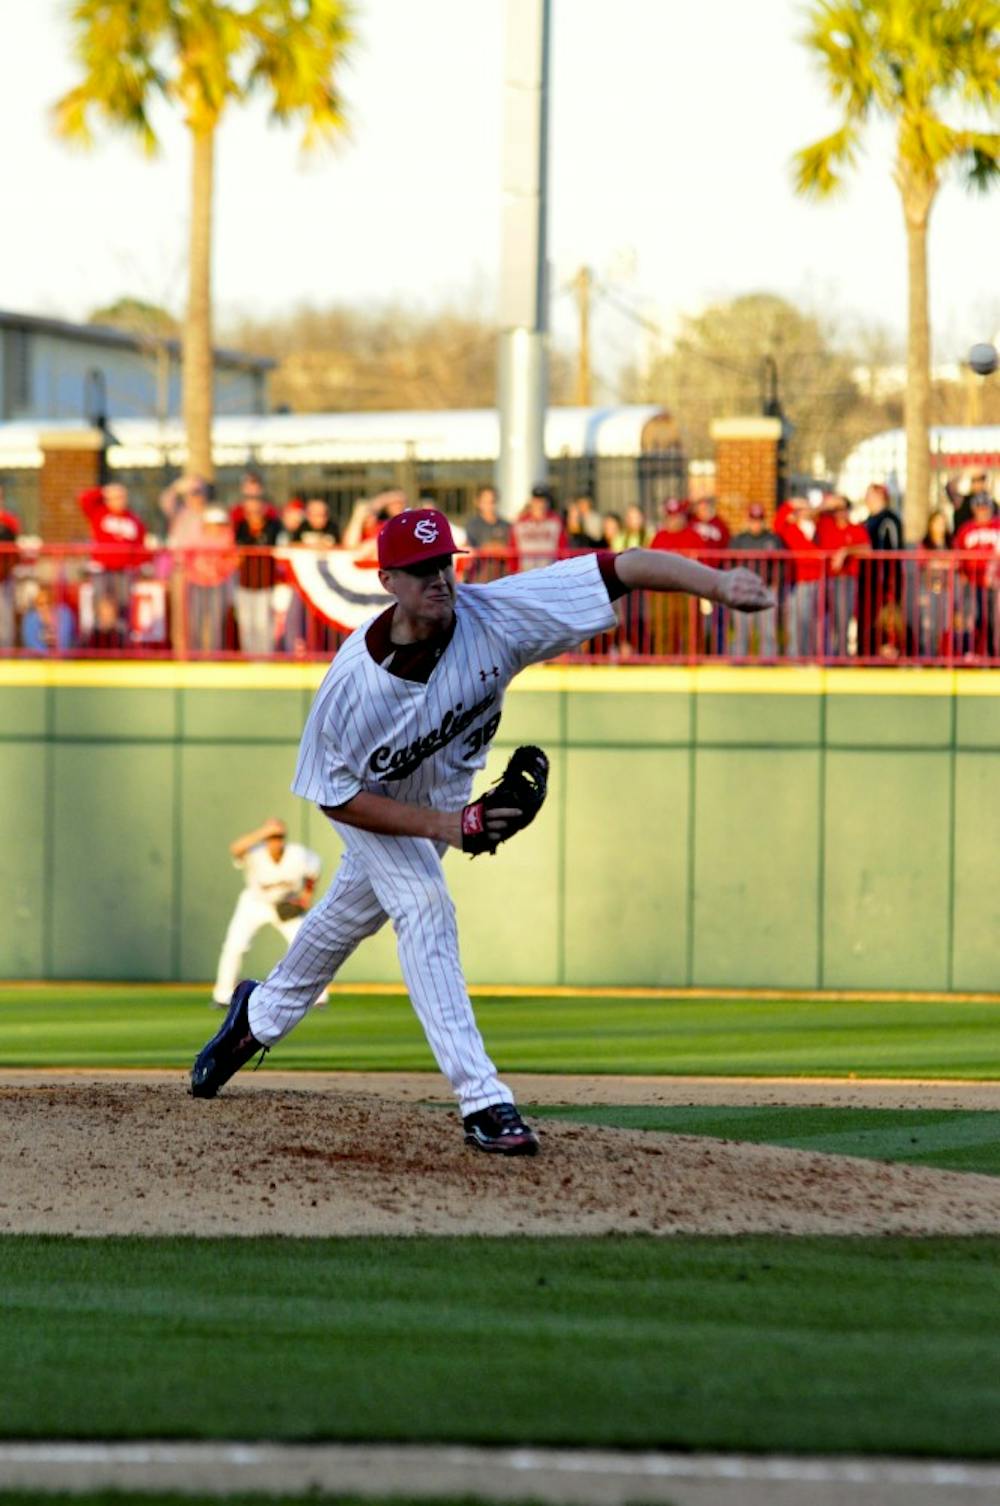 	<p>Senior closer Tyler Webb has missed time with a left elbow injury, but an <span class="caps">MRI</span> revealed no structural damage. Coach Chad Holbrook said he will not rush Webb back but hopes he can pitch against Kentucky this weekend.</p>